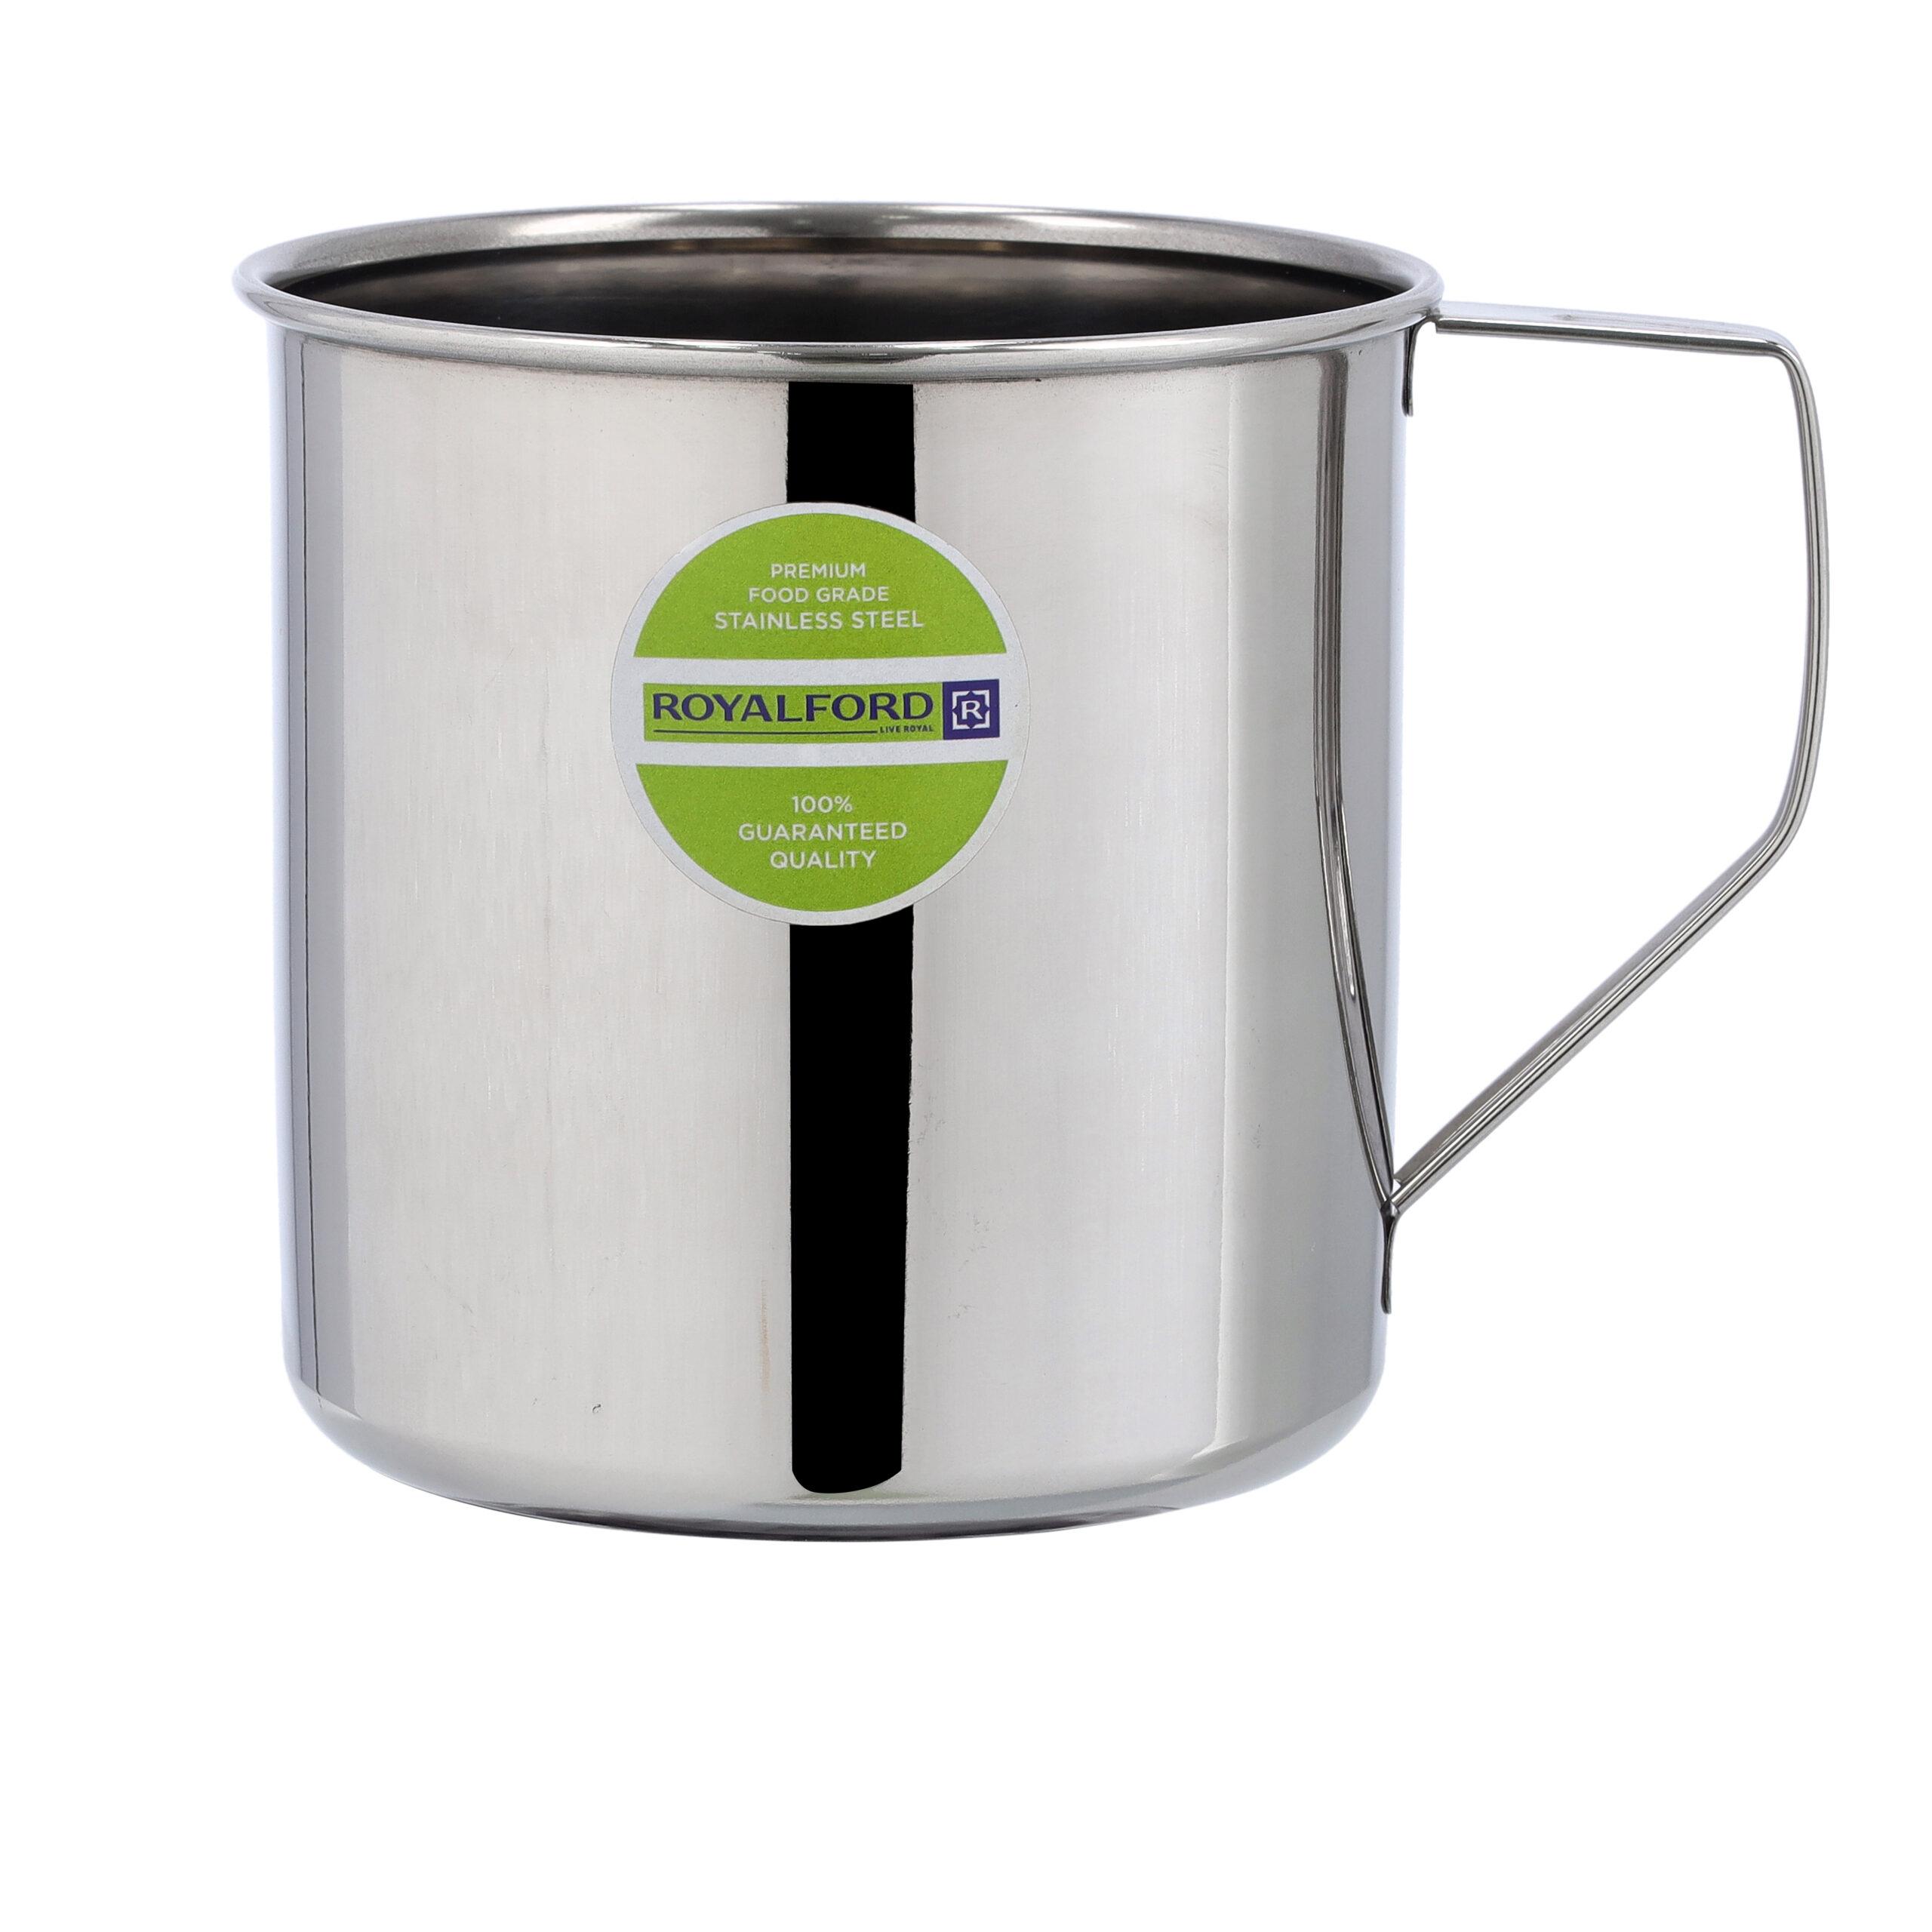 Royalford Stainless Steel Rainbow Mug with Strong Handle | RF10146 | 10 cm | Ideal for Coffee, Tea, Milk and Water | Premium Quality | 100% Food Grade